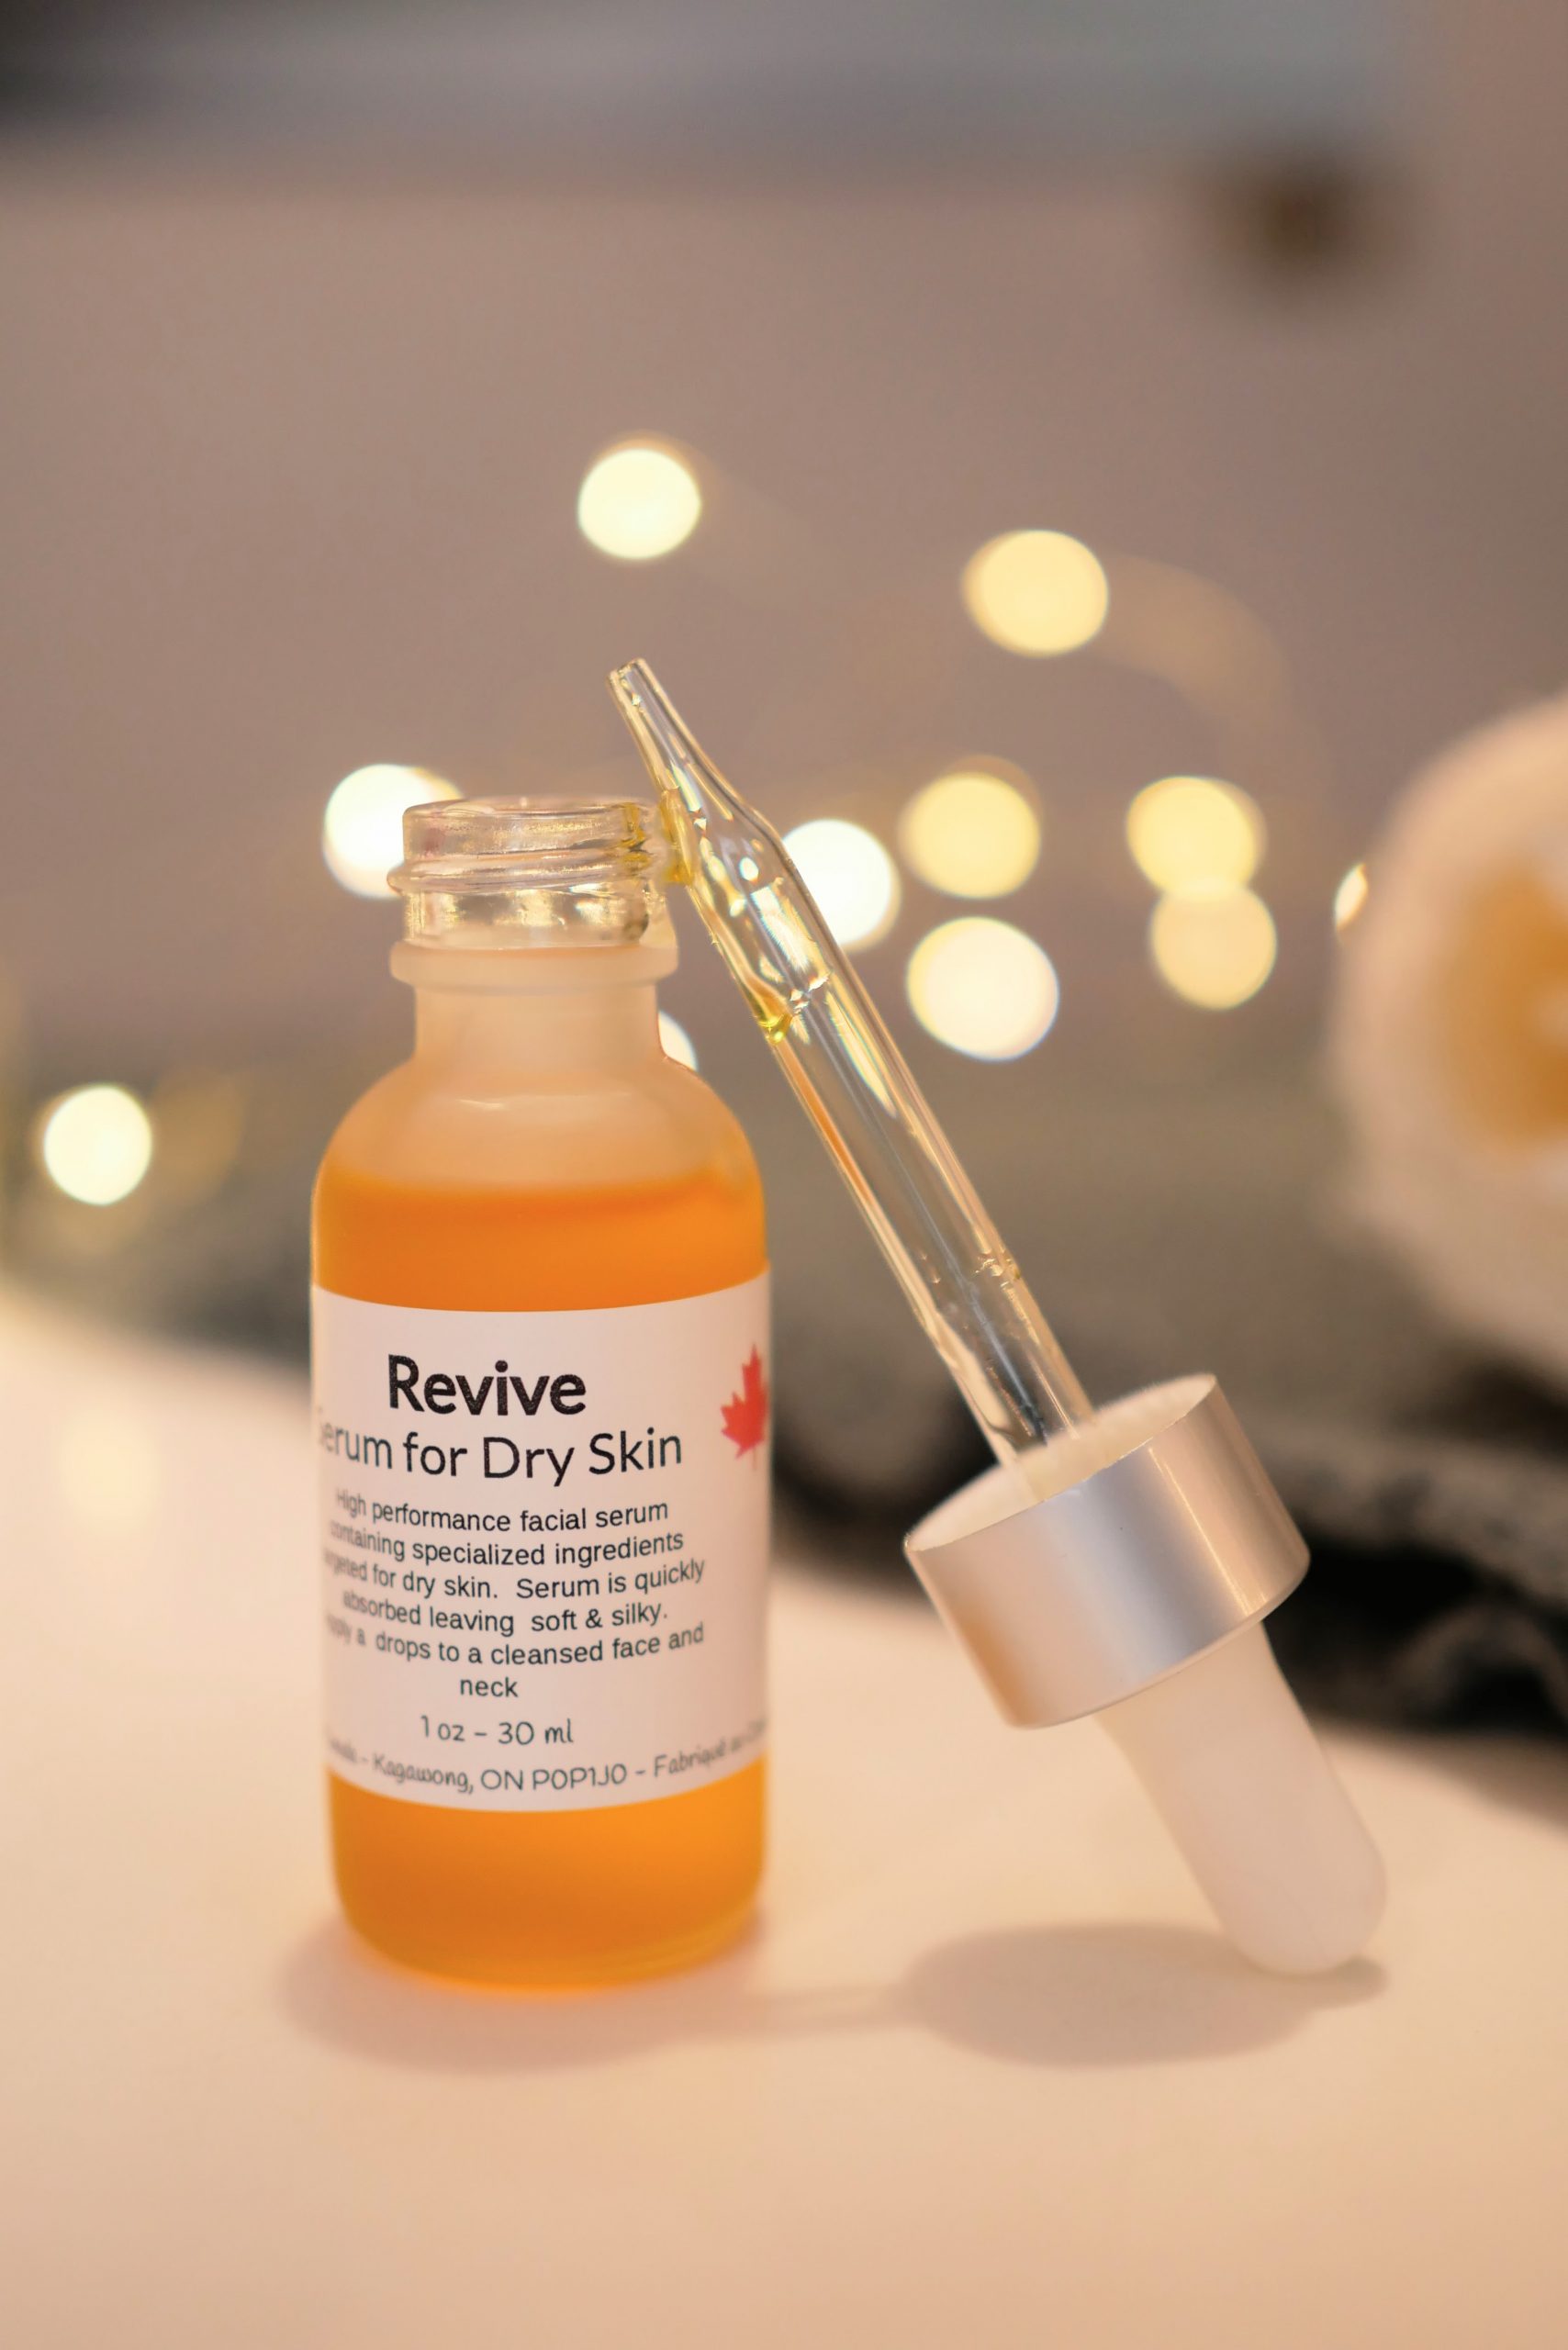 Revive - Serum for Dry Skin - Bare Naked Beauty